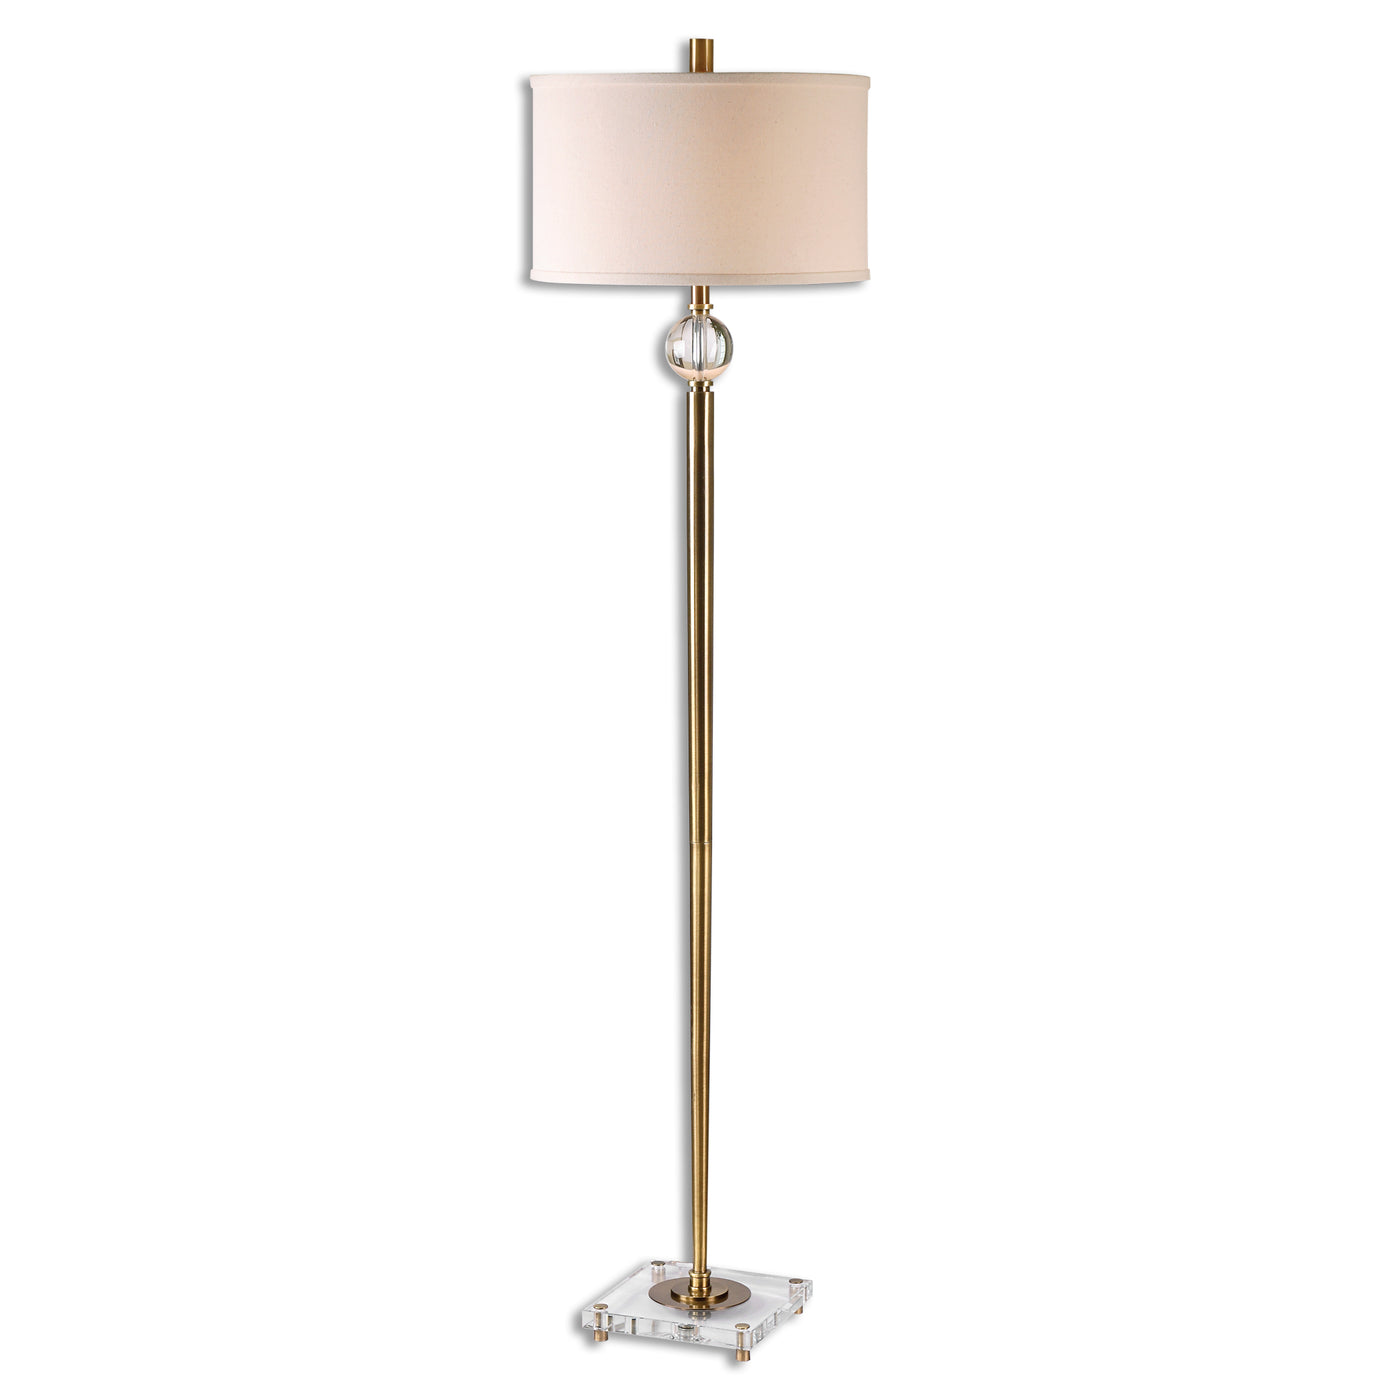 Tapered Metal Base Finished In A Plated Brush Brass Accented With Crystal Details. The Round Hardback Drum Shade Is An Off...